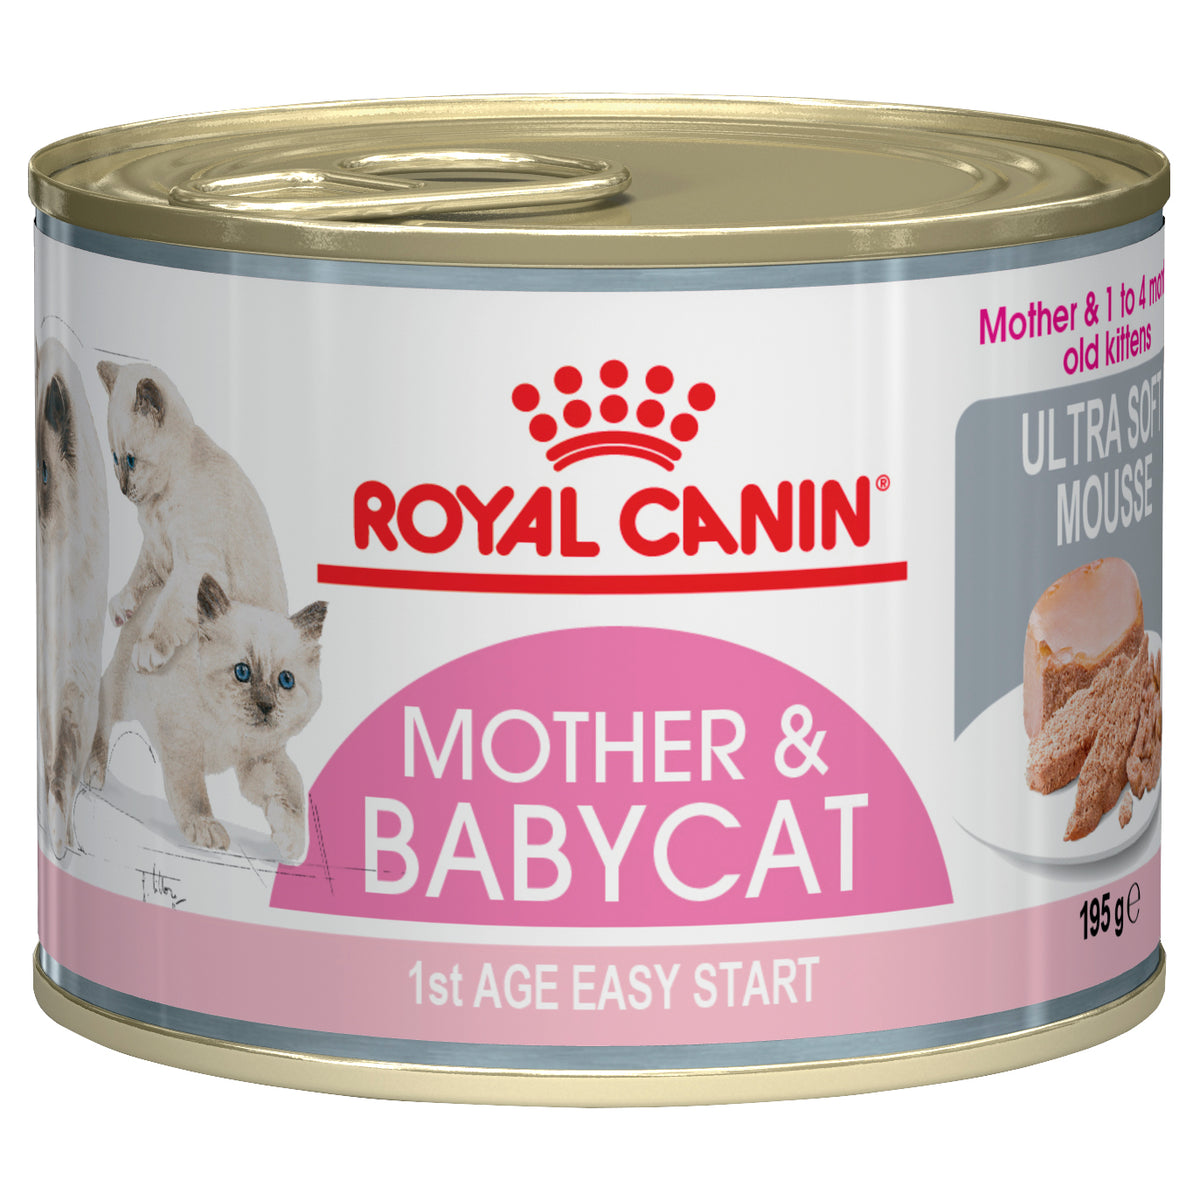 Royal Canin Baby Cat Mousse Can